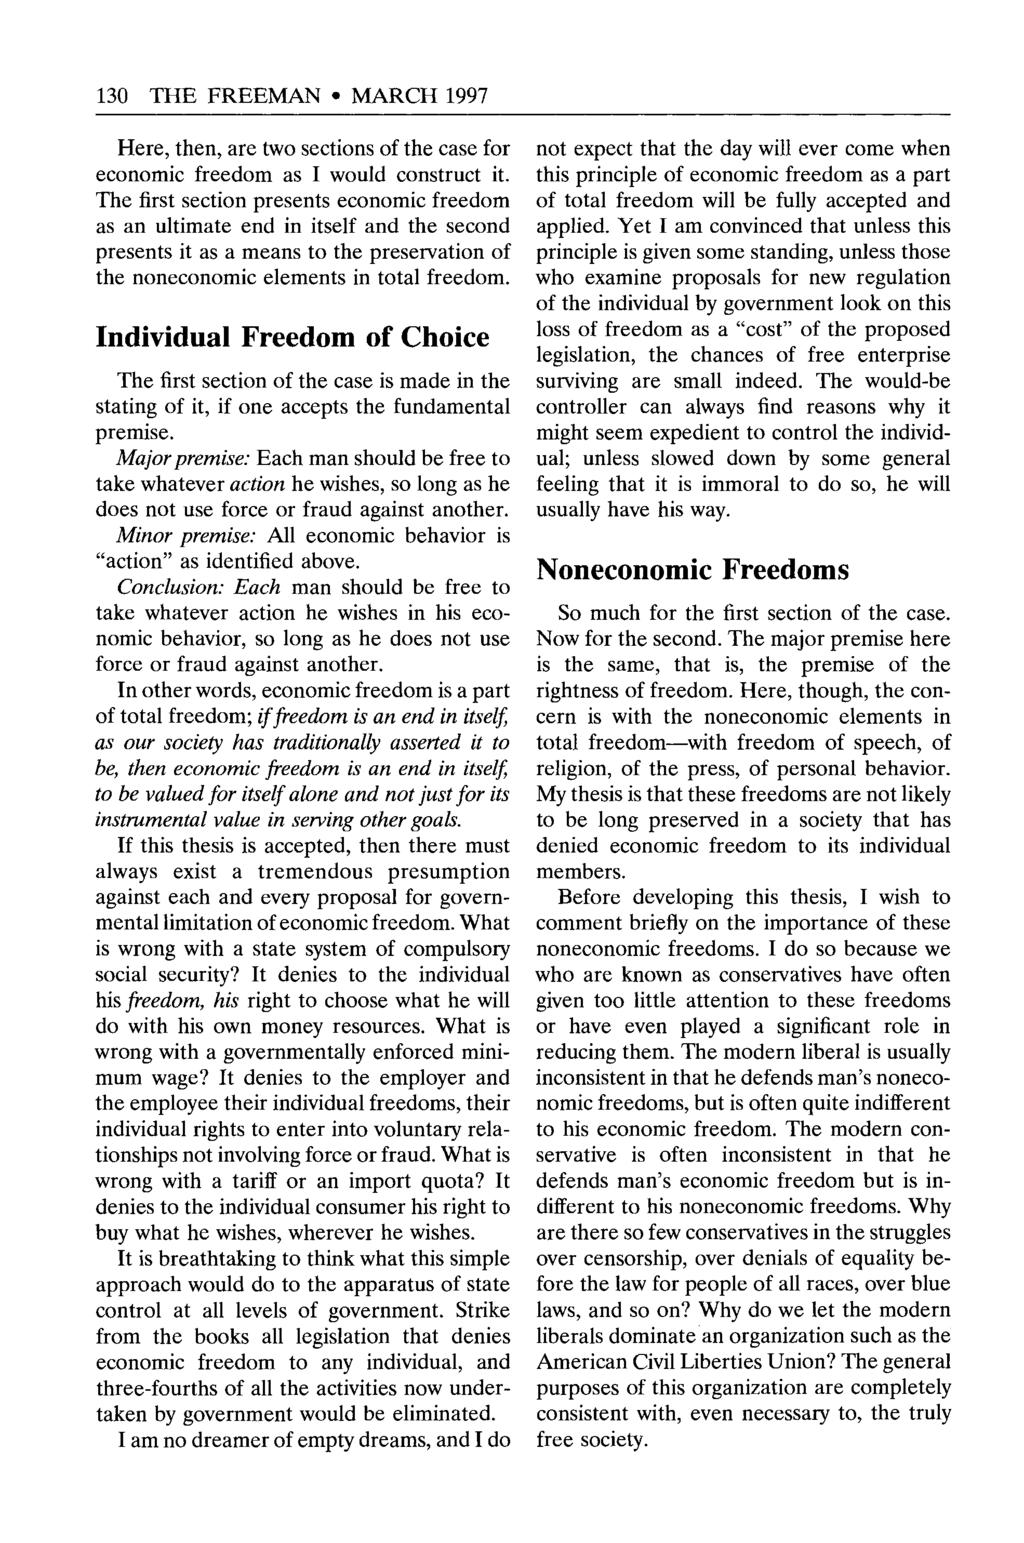 130 THE FREEMAN MARCH 1997 Here, then, are two sections of the case for economic freedom as I would construct it.